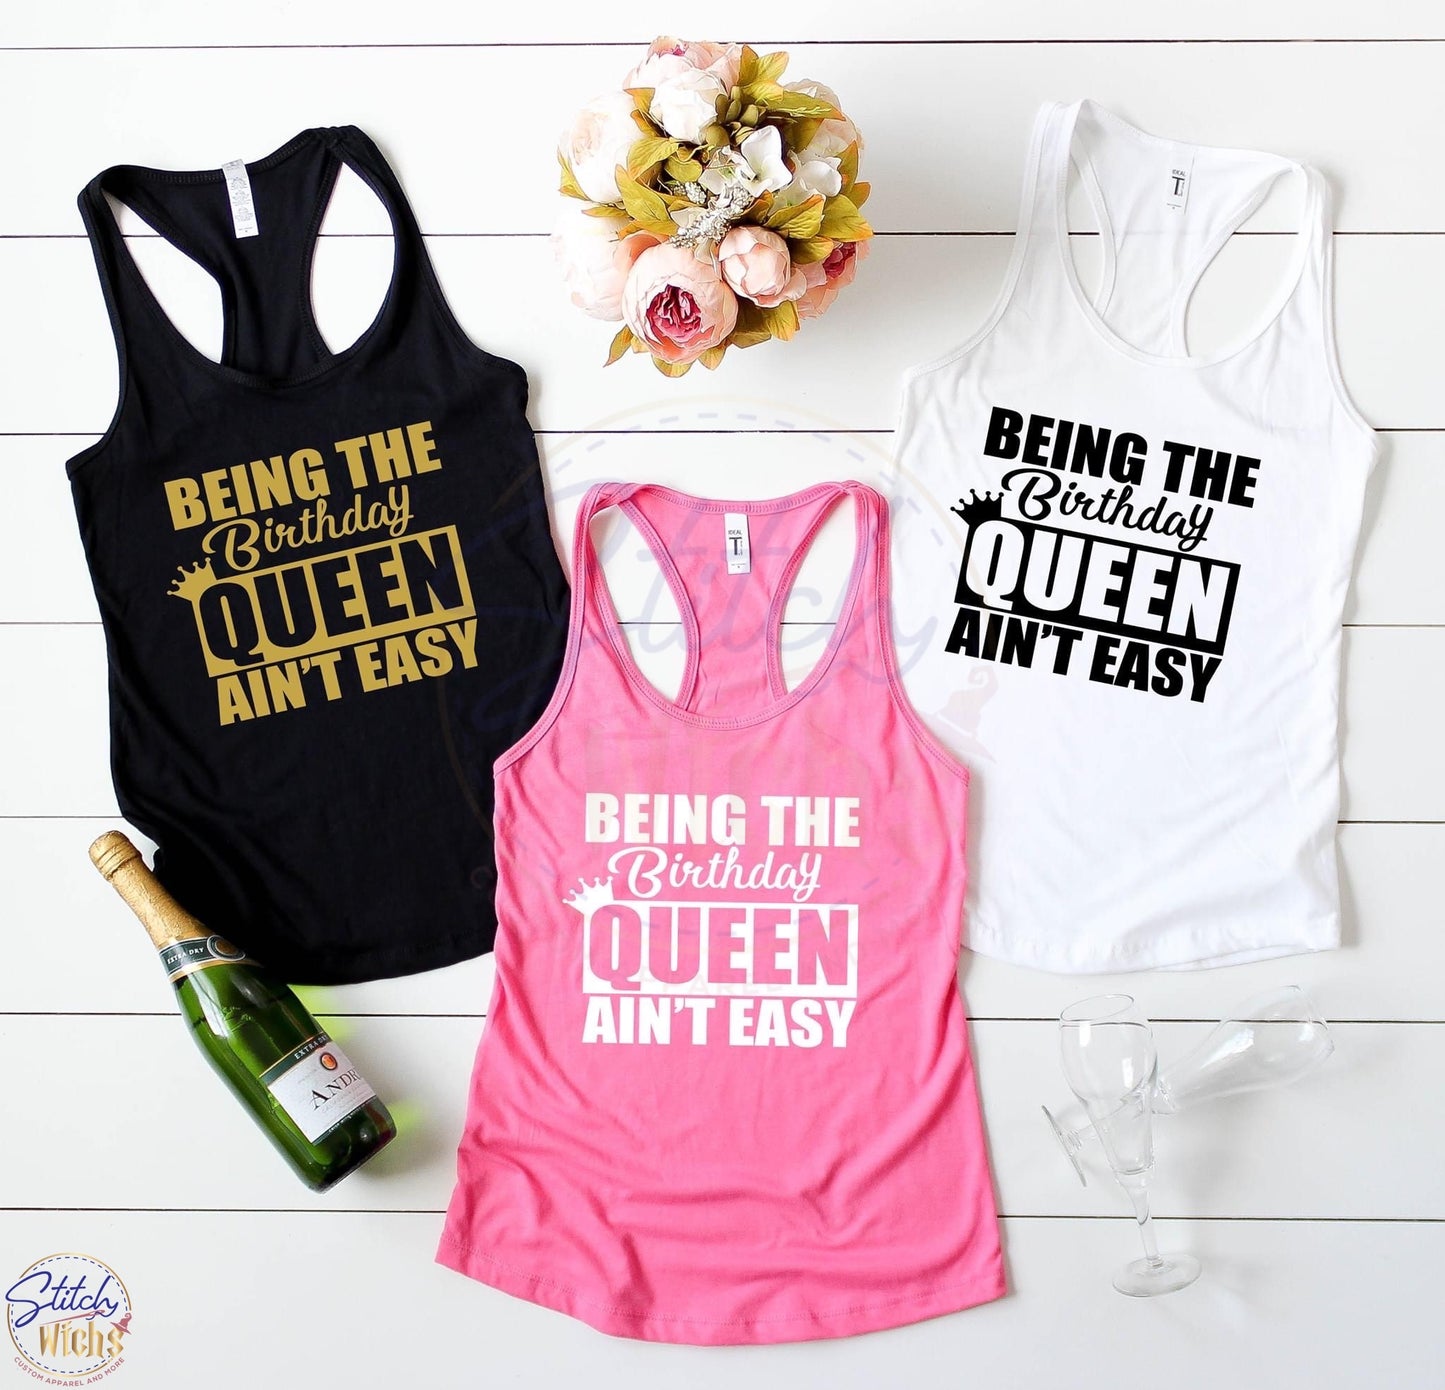 Being the Queen Ain't Easy Shirt